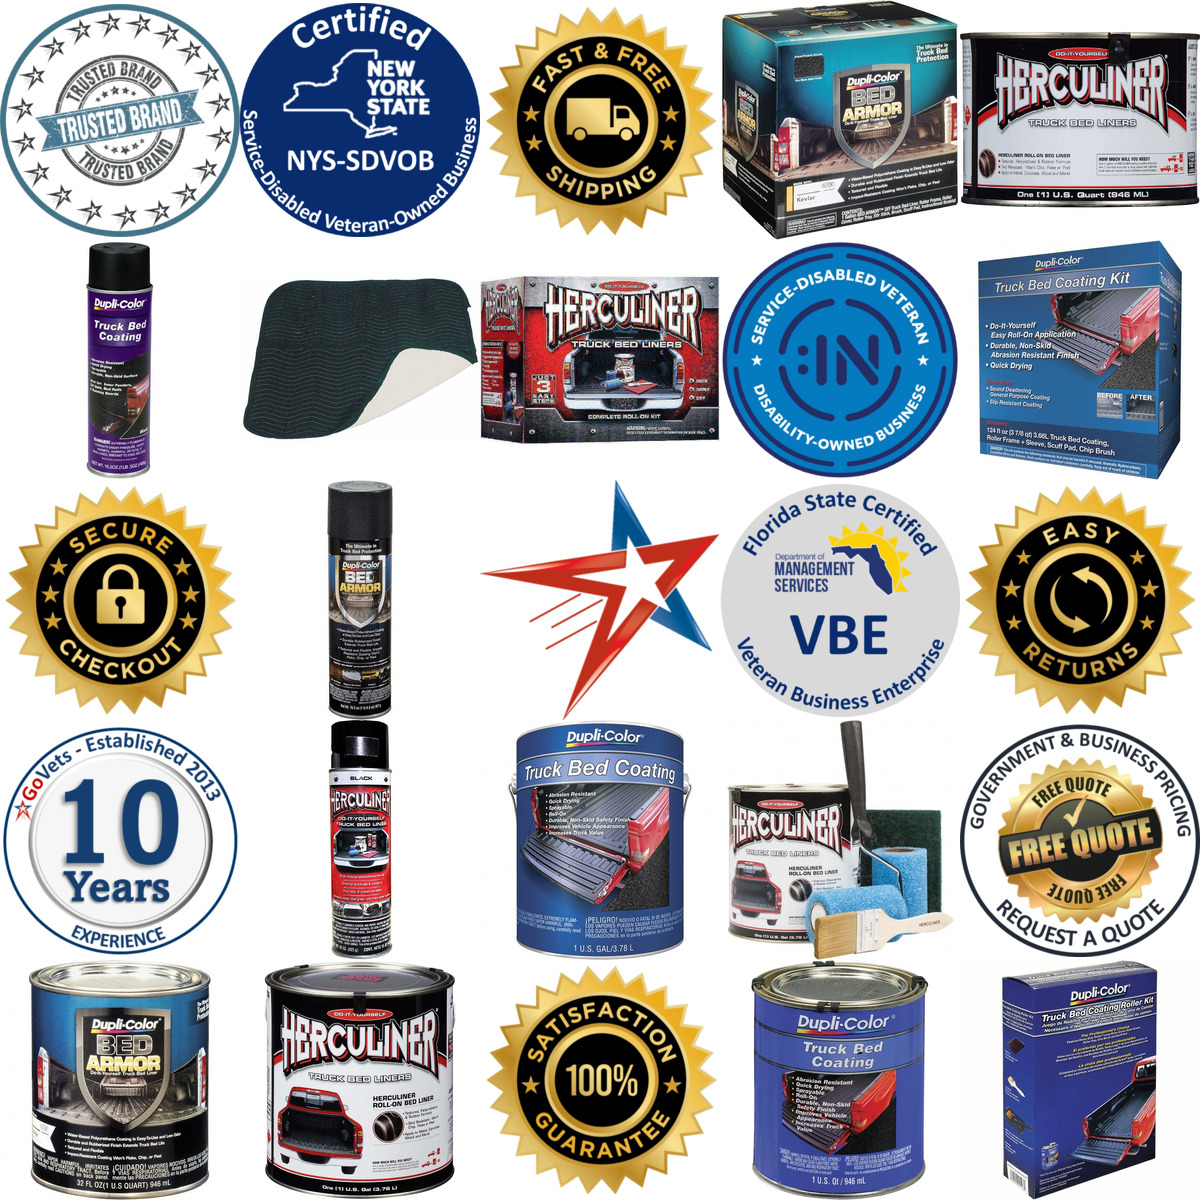 A selection of Cargo Liners products on GoVets